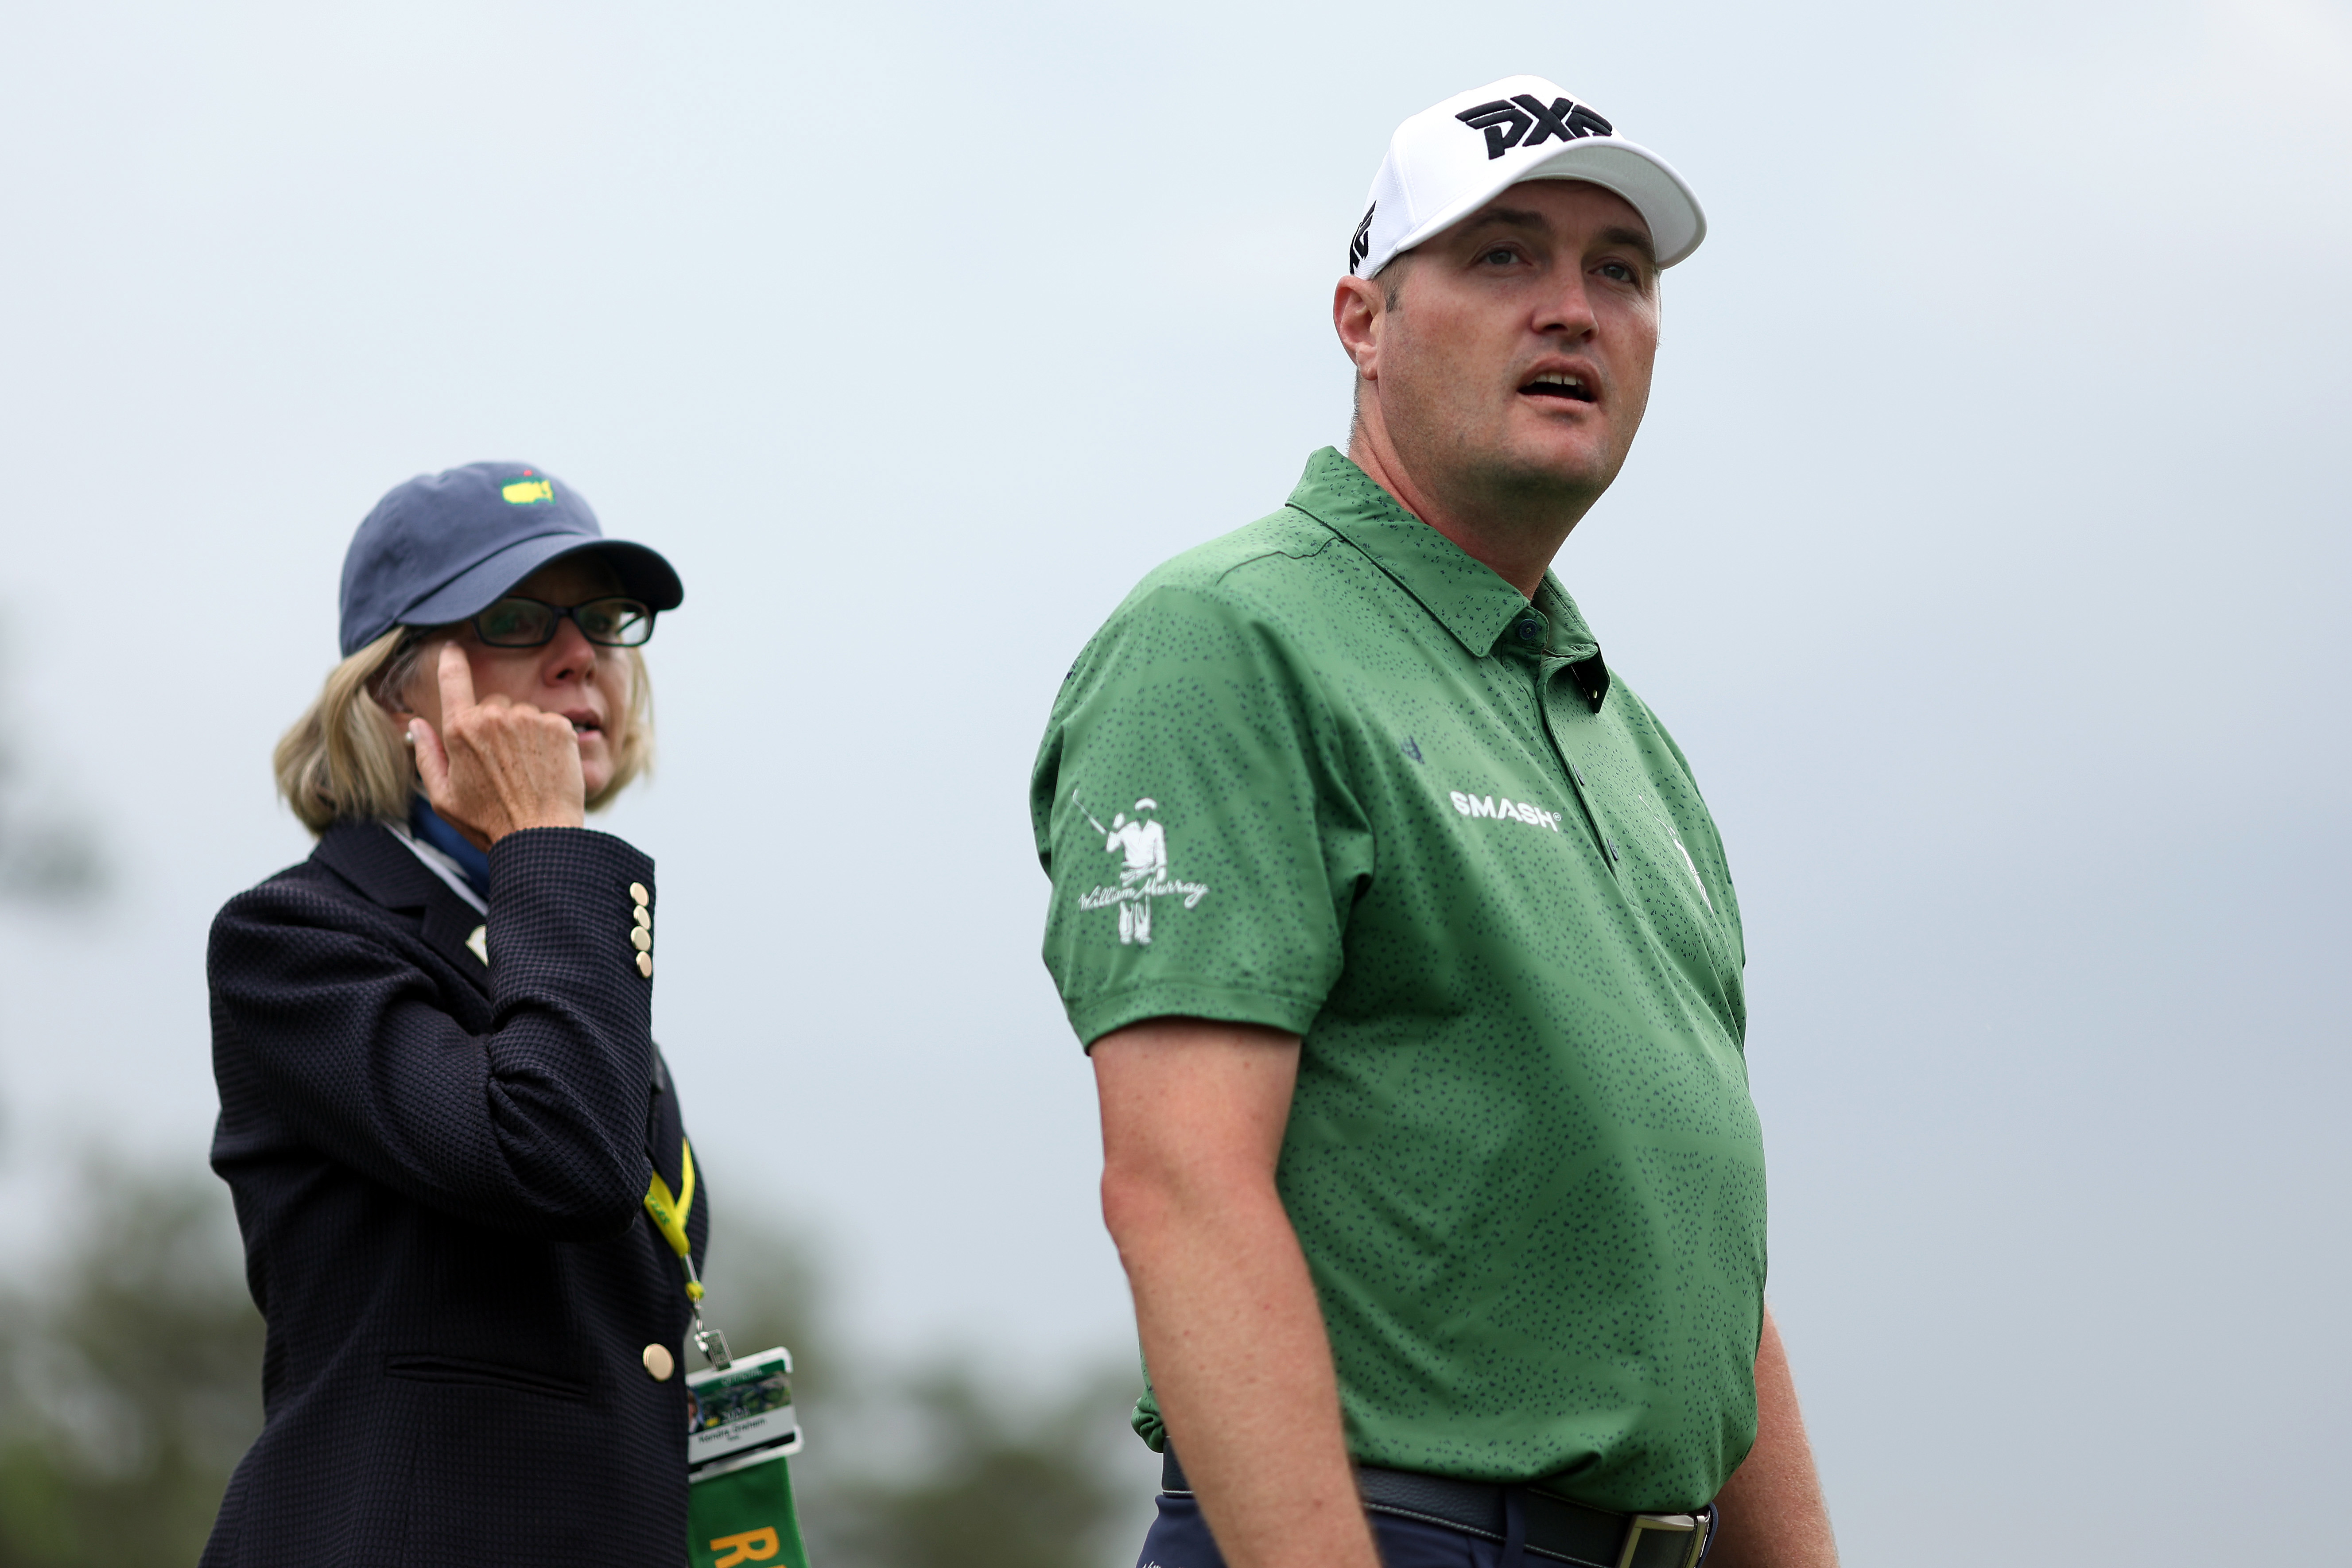 AUGUSTA, GEORGIA - APRIL 07: Jason Kokrak of the United States reacts on the 18th green after play was suspended due to weather conditions during the second round of the 2023 Masters Tournament at Augusta National Golf Club on April 07, 2023 in Augusta, Georgia. (Photo by Christian Petersen/Getty Images)